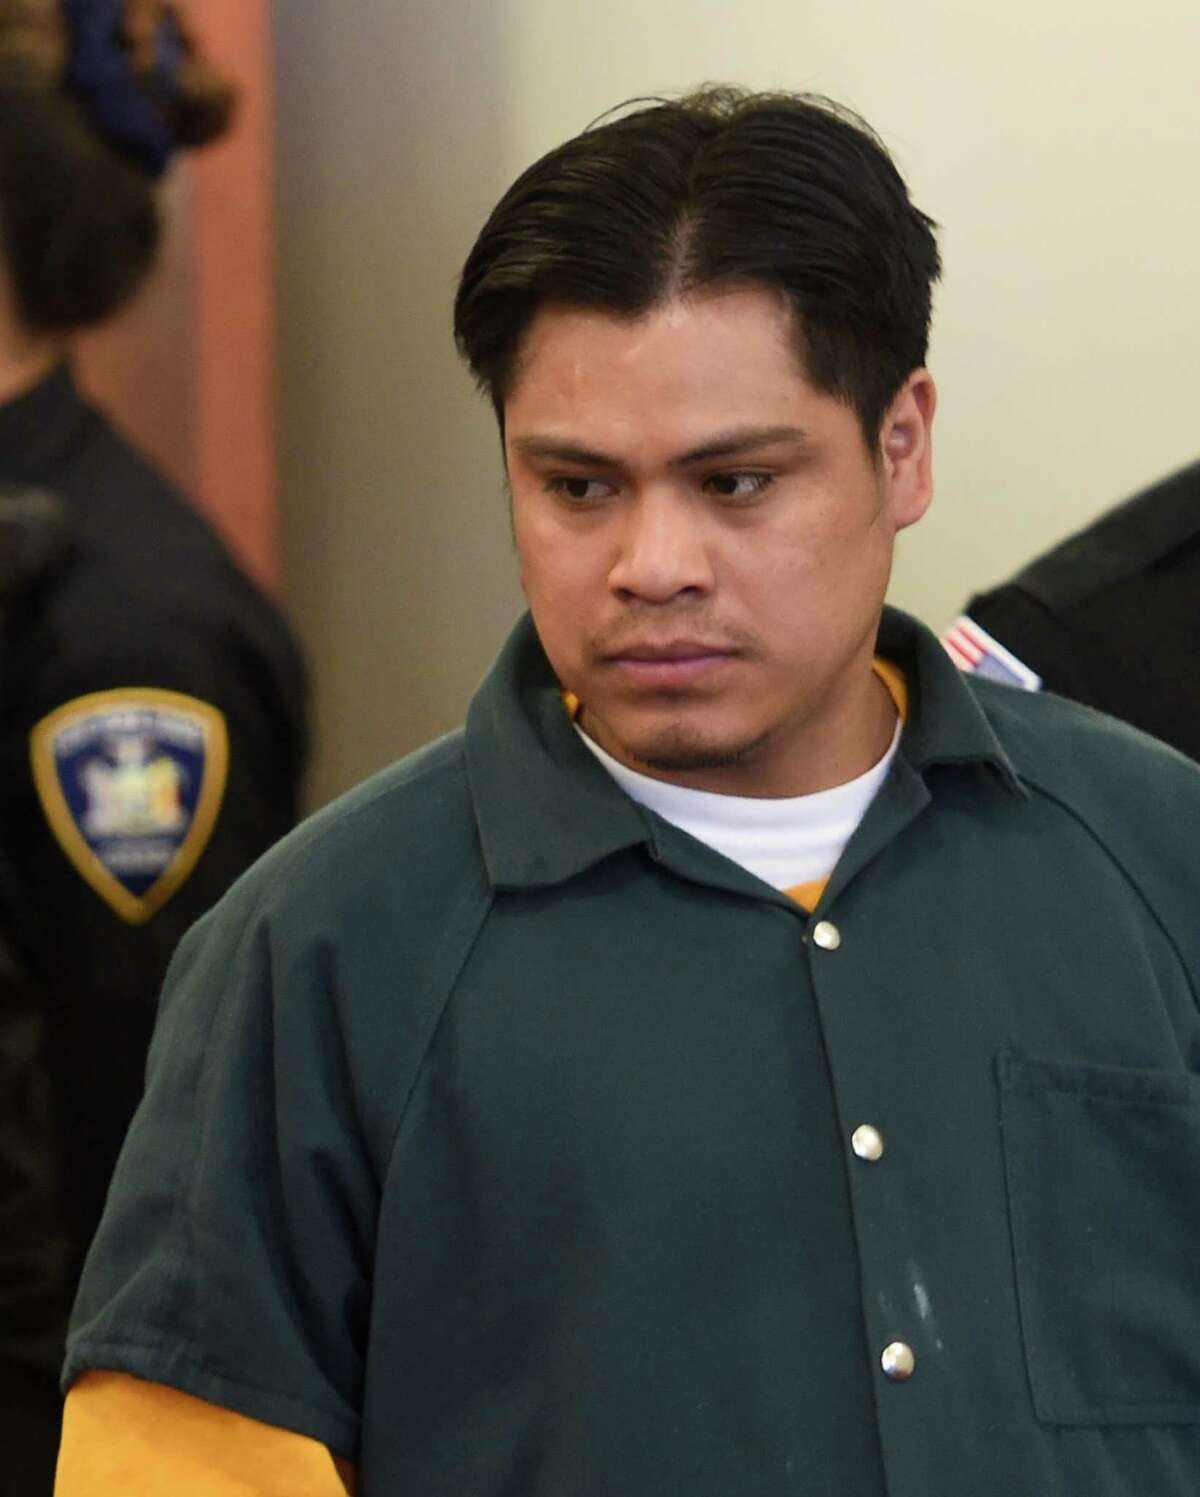 Cresencio Salazar enters City Court for his arraignment on a second degree murder warrant for the alleged stabbing and beating of Javier Gomez on Tuesday, Oct. 25, 2016, in Troy, N.Y. (Skip Dickstein/Times Union archive)